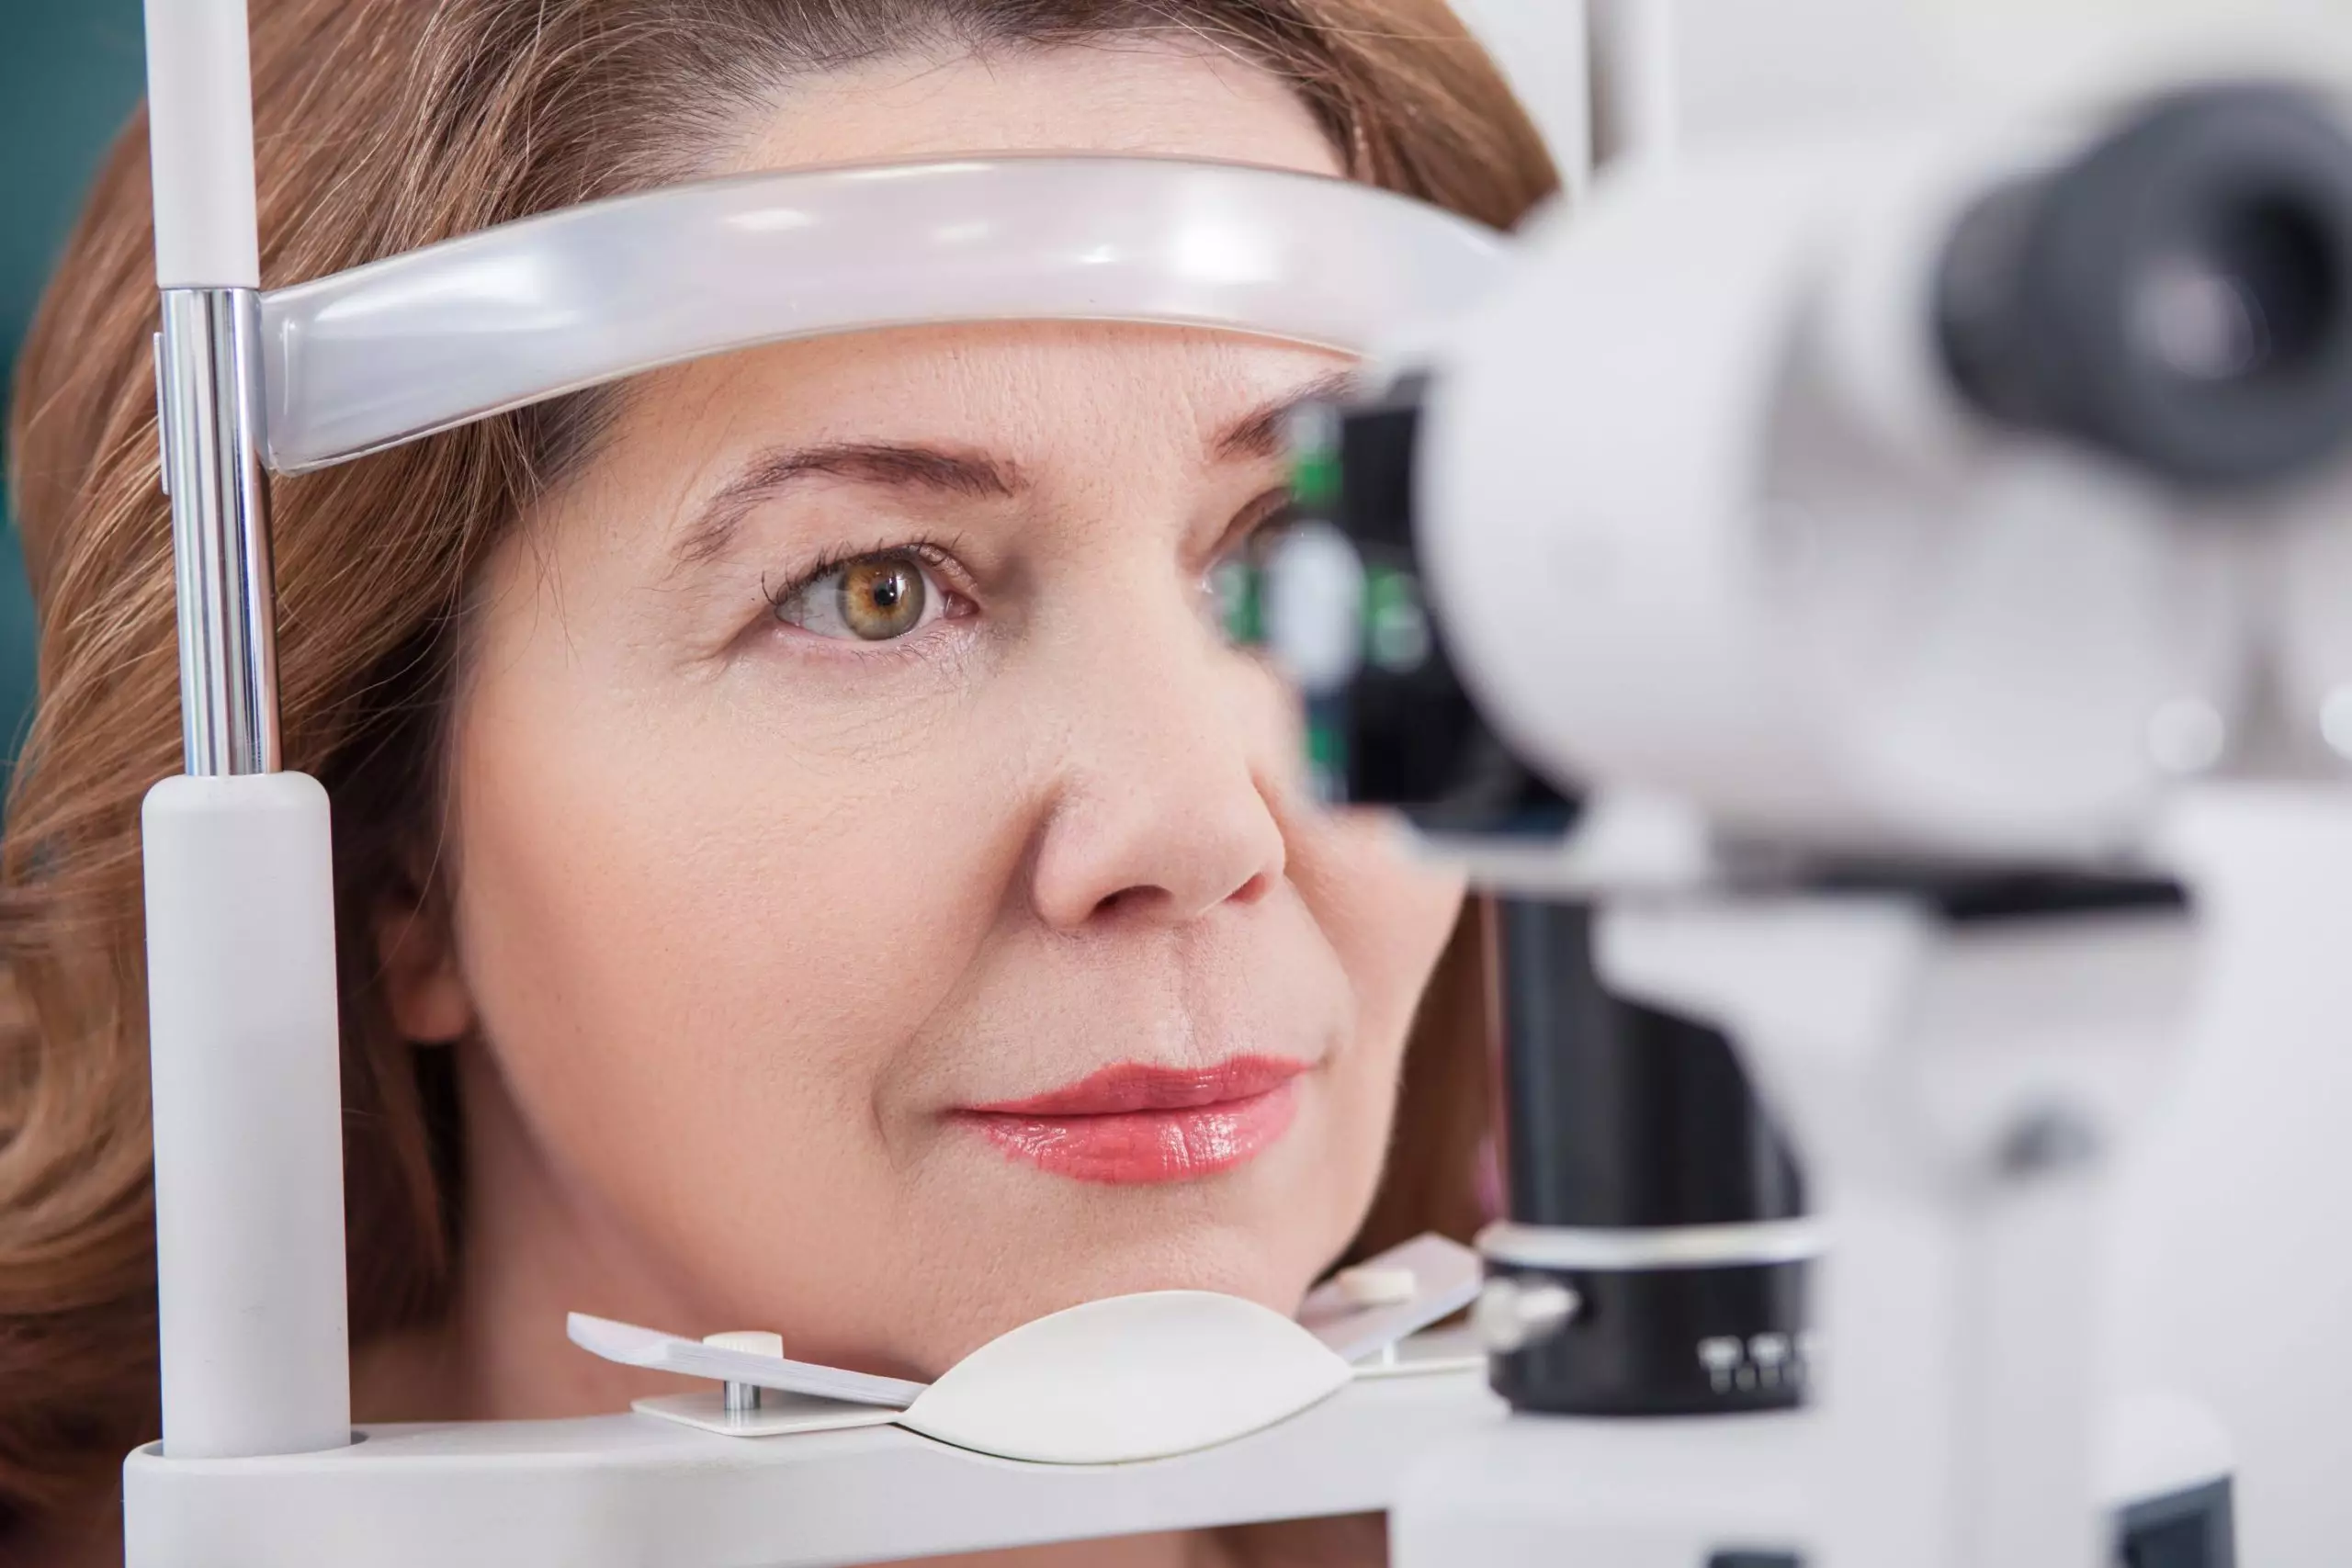 Why There’s a Special Eye Health and Safety Month for Women